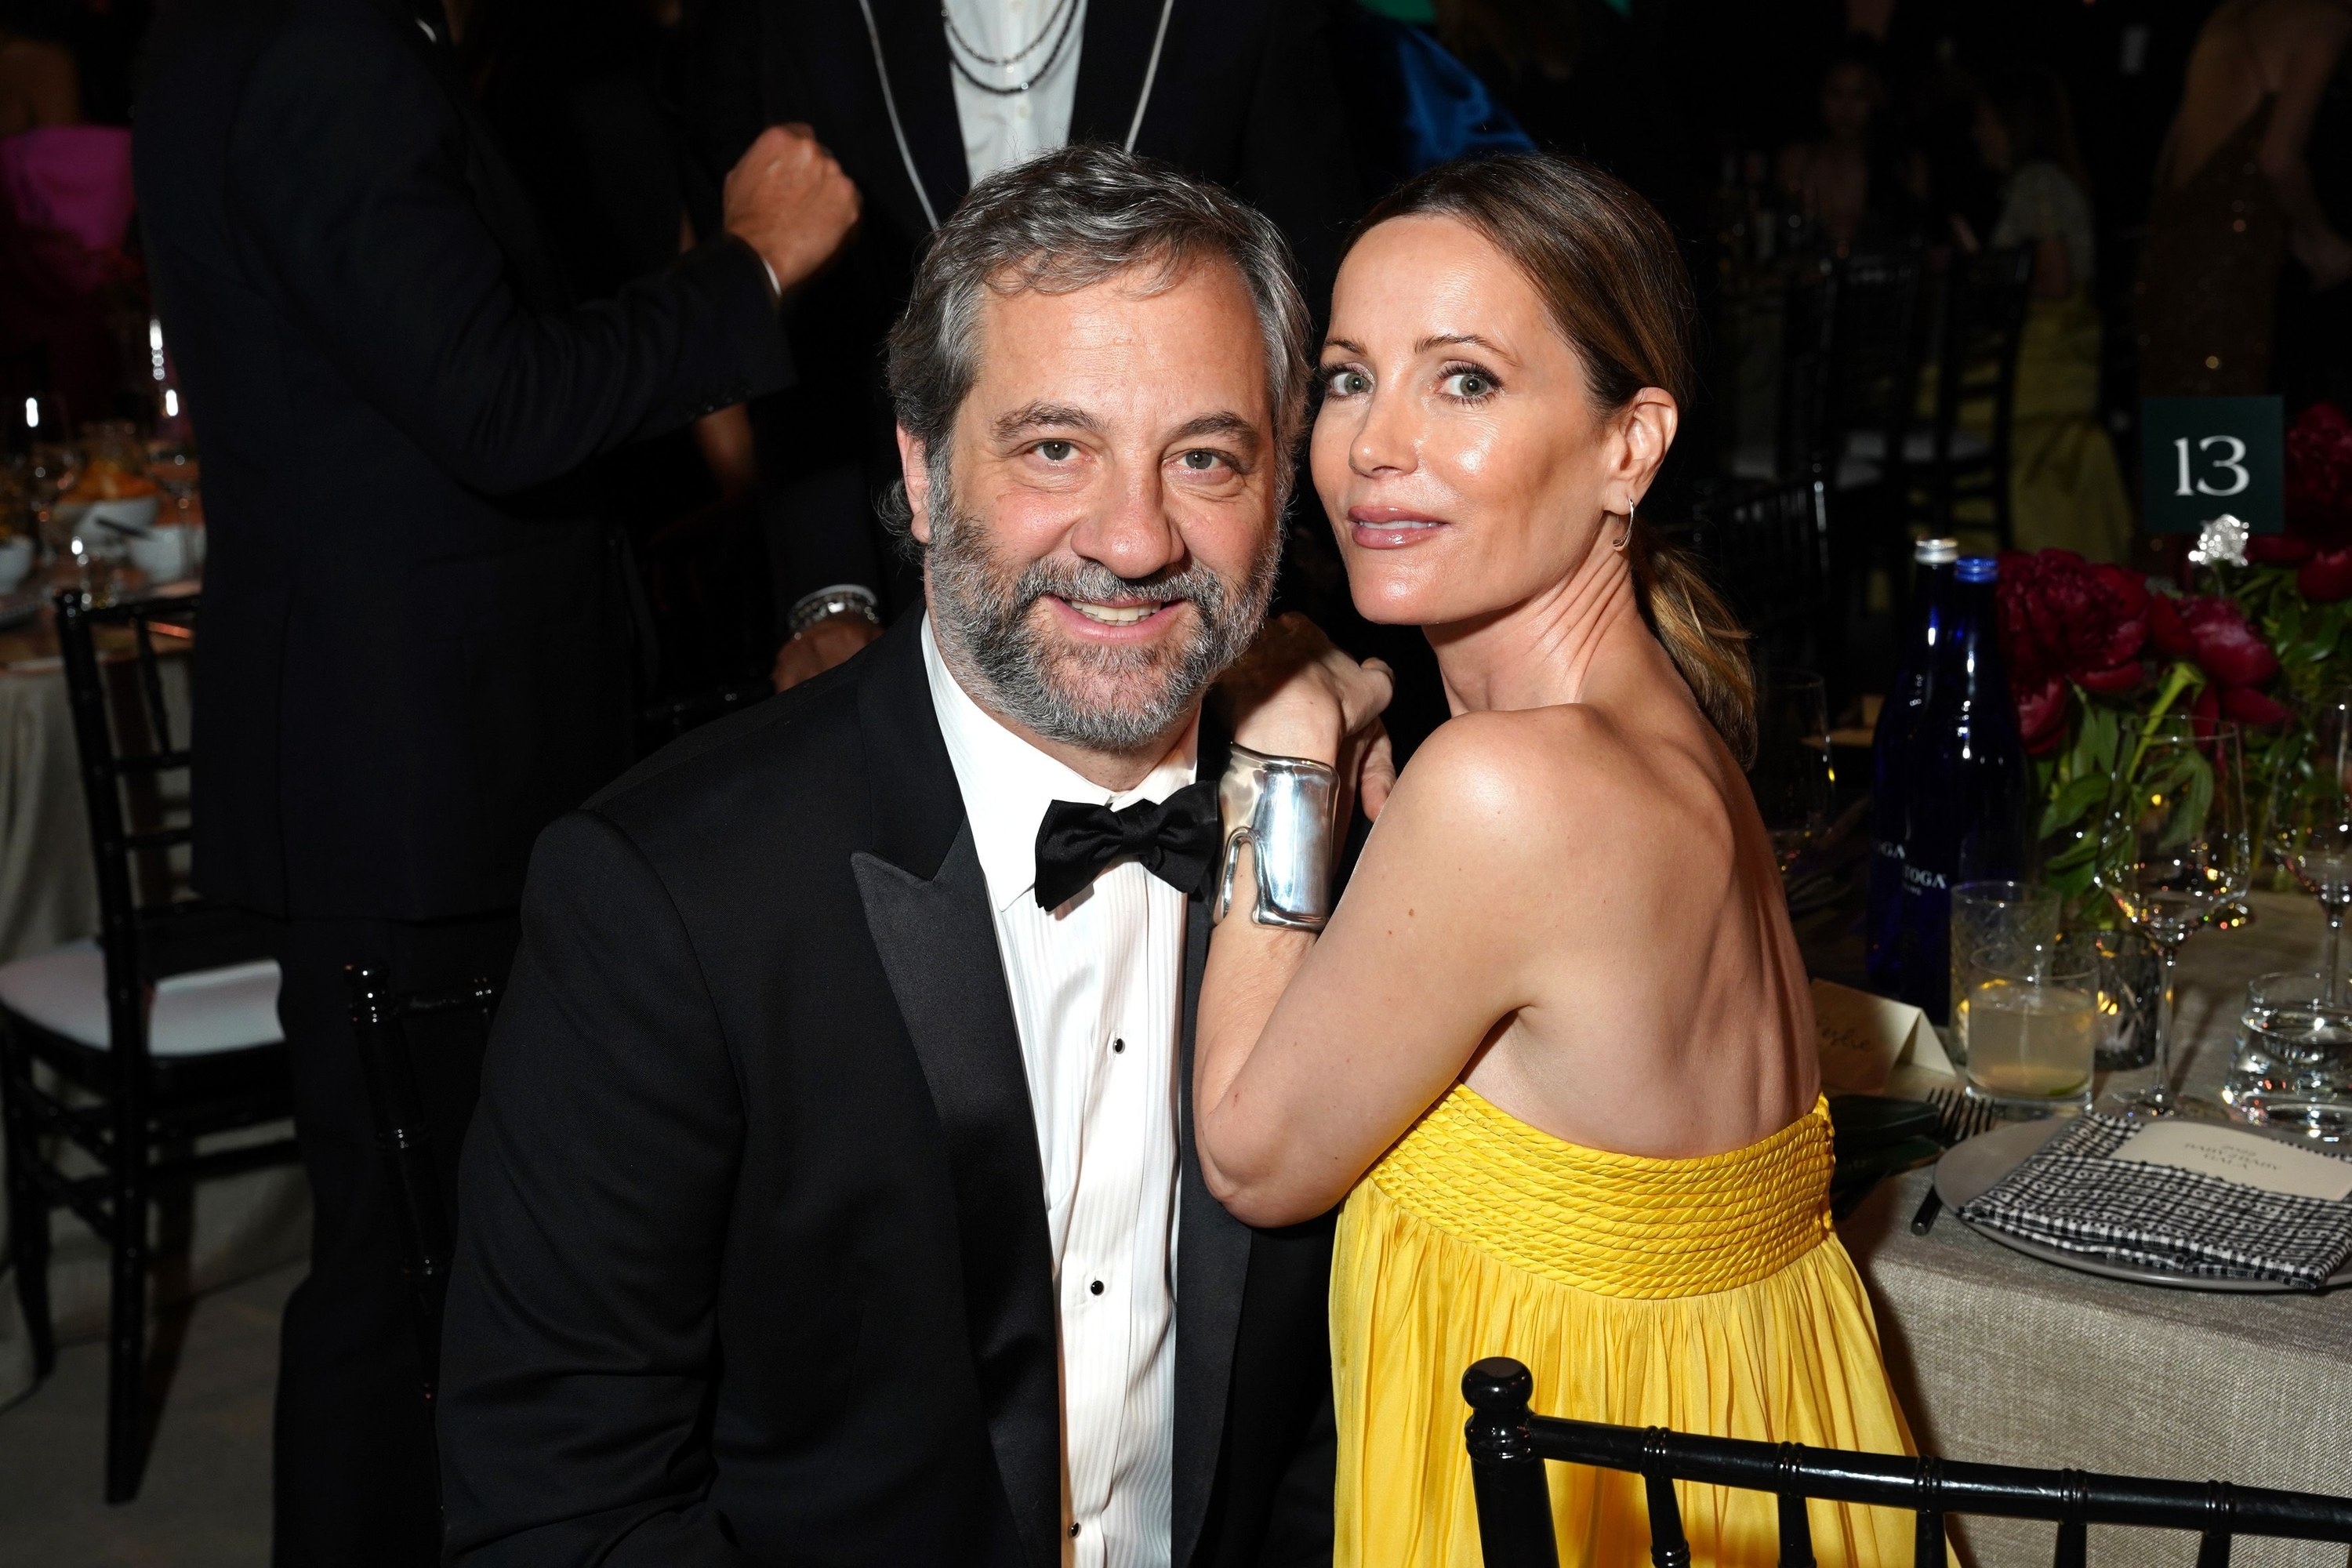 Leslie Mann and Judd Apatow at an event